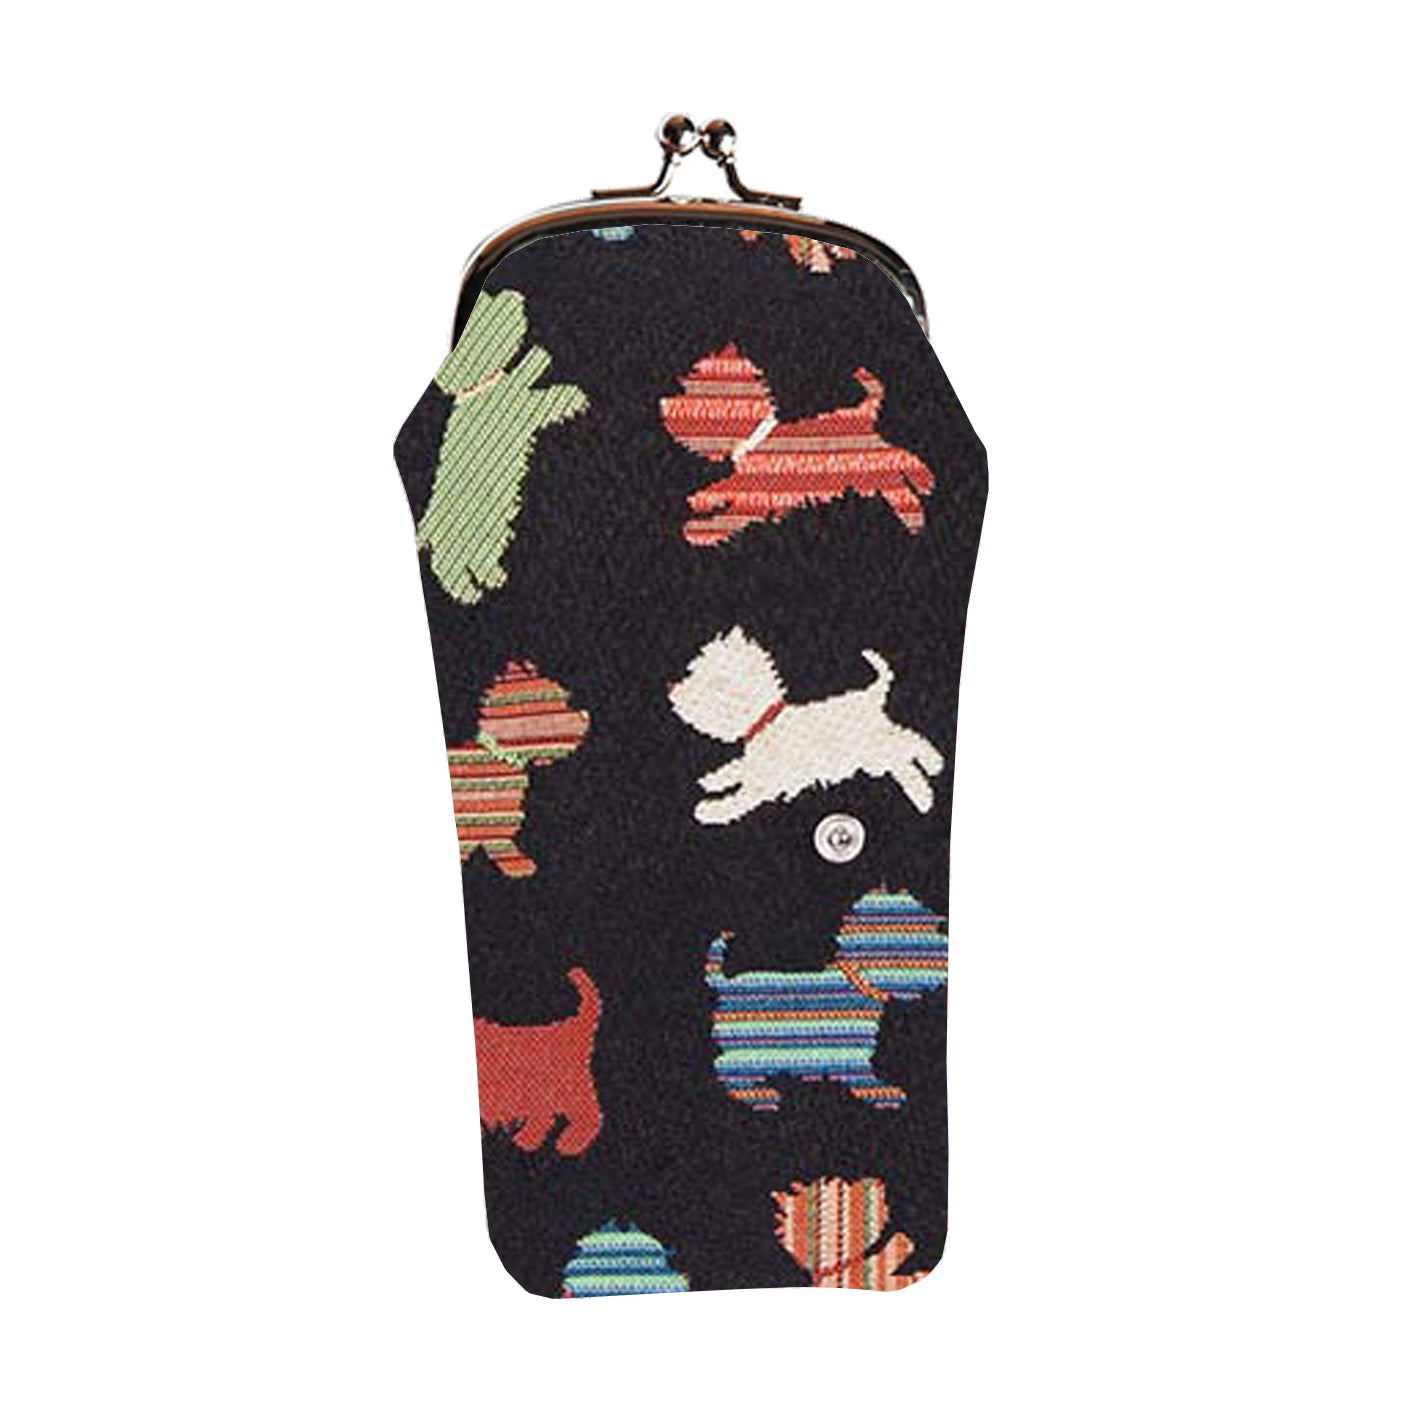 GPCH-PUPPY | PLAYFUL PUPPY GLASSES SUNGLASSES POUCH CASE